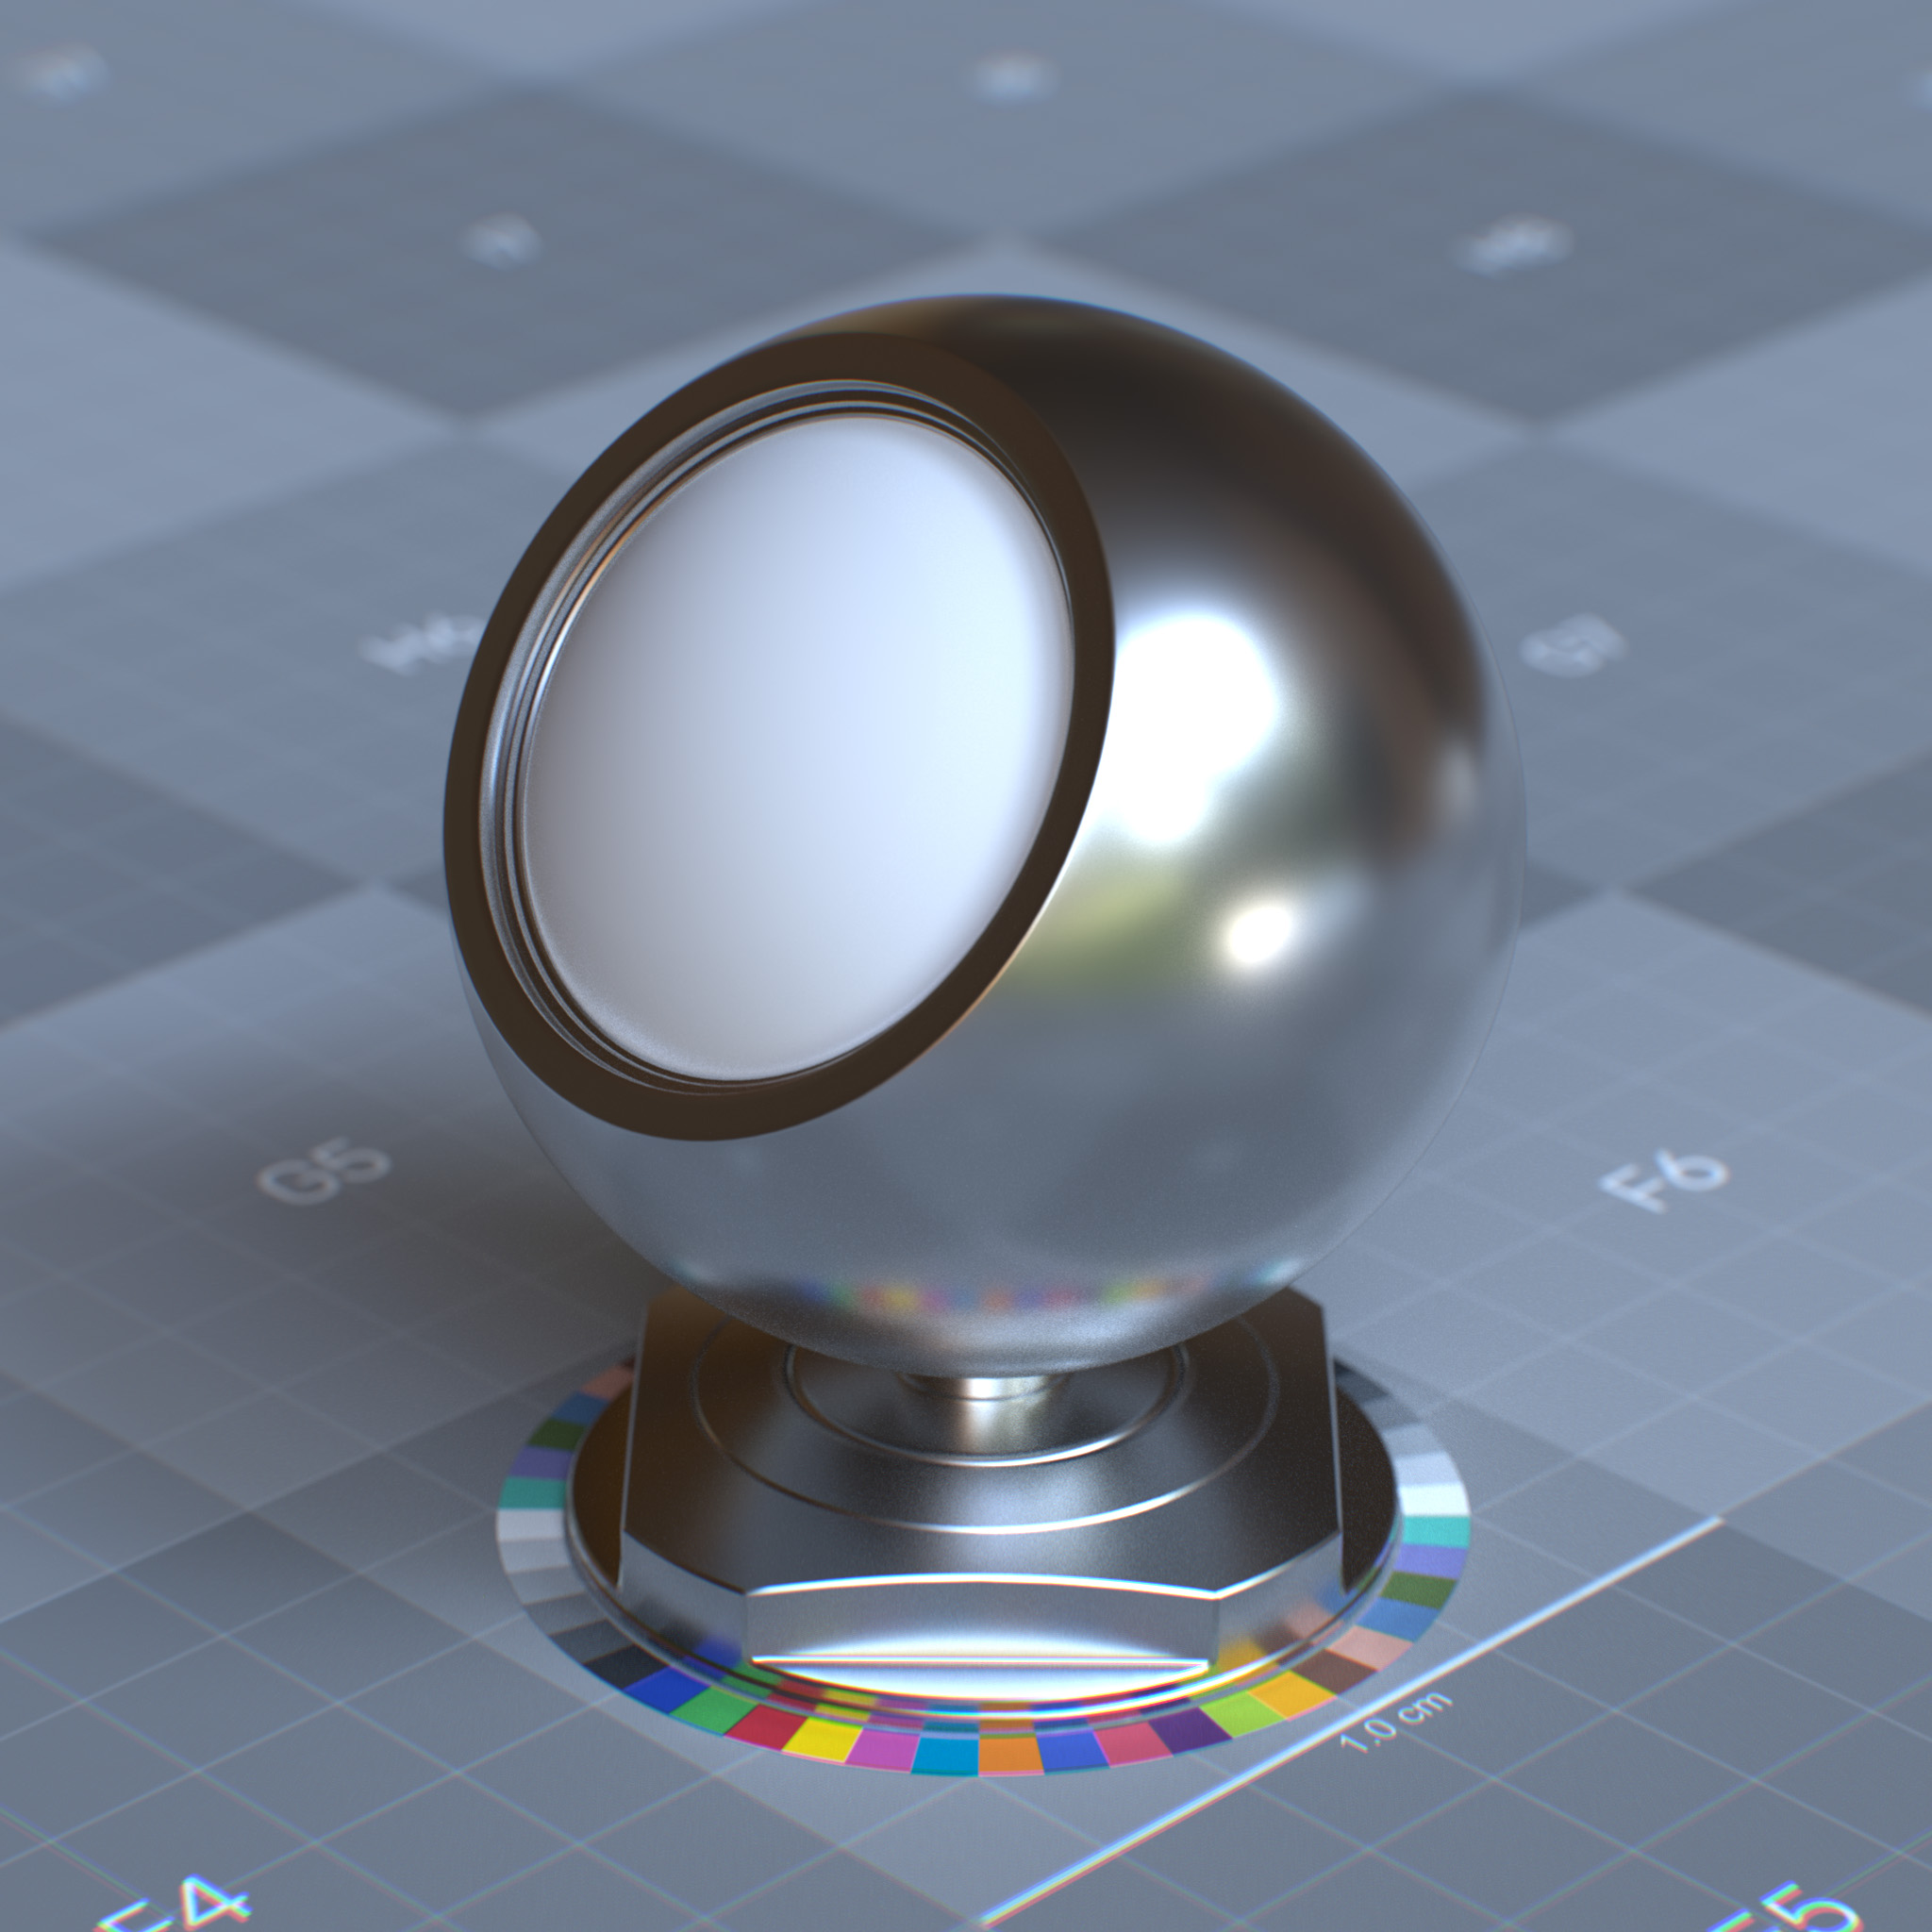 rtx_material_omnisurfacebase_specular_reflection_color_1p0_1p0_1p0_metalness